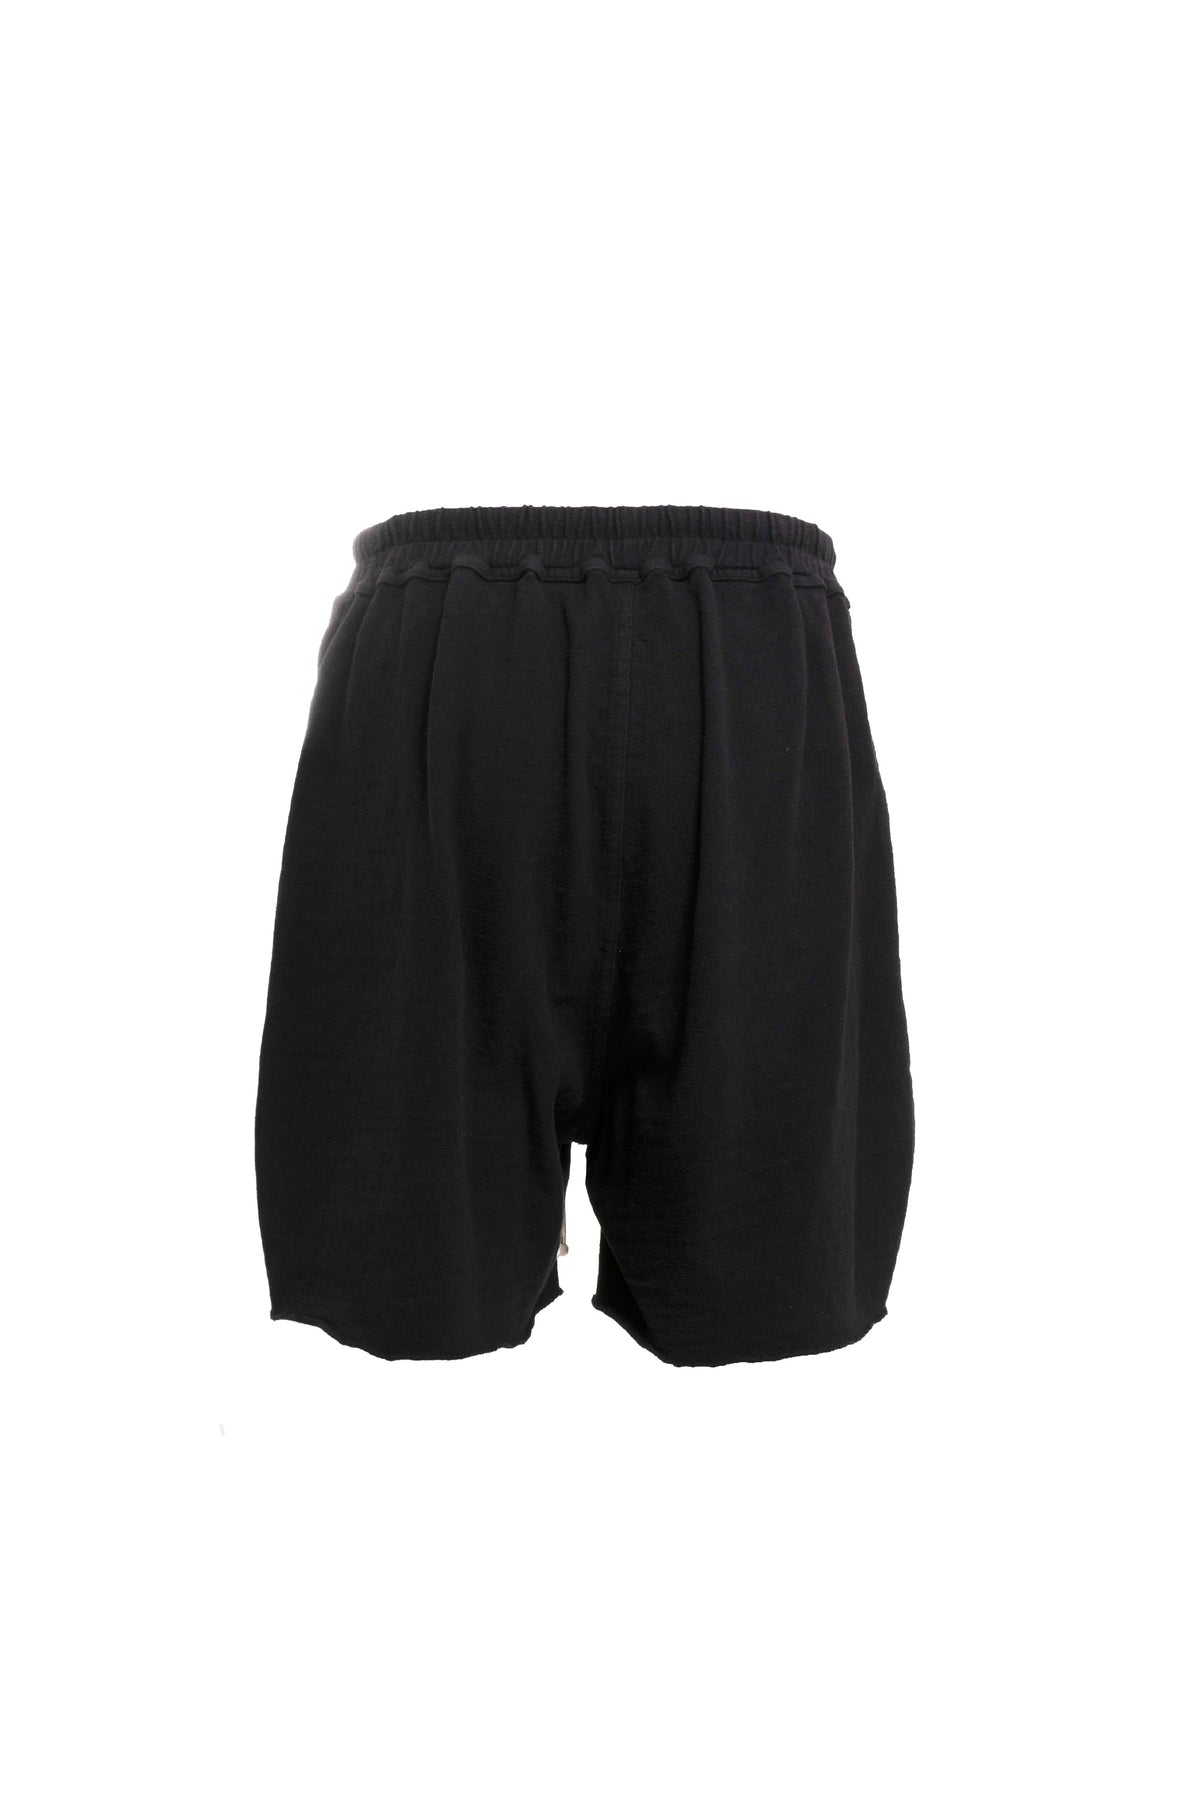 PRONGED BOXERS / BLK